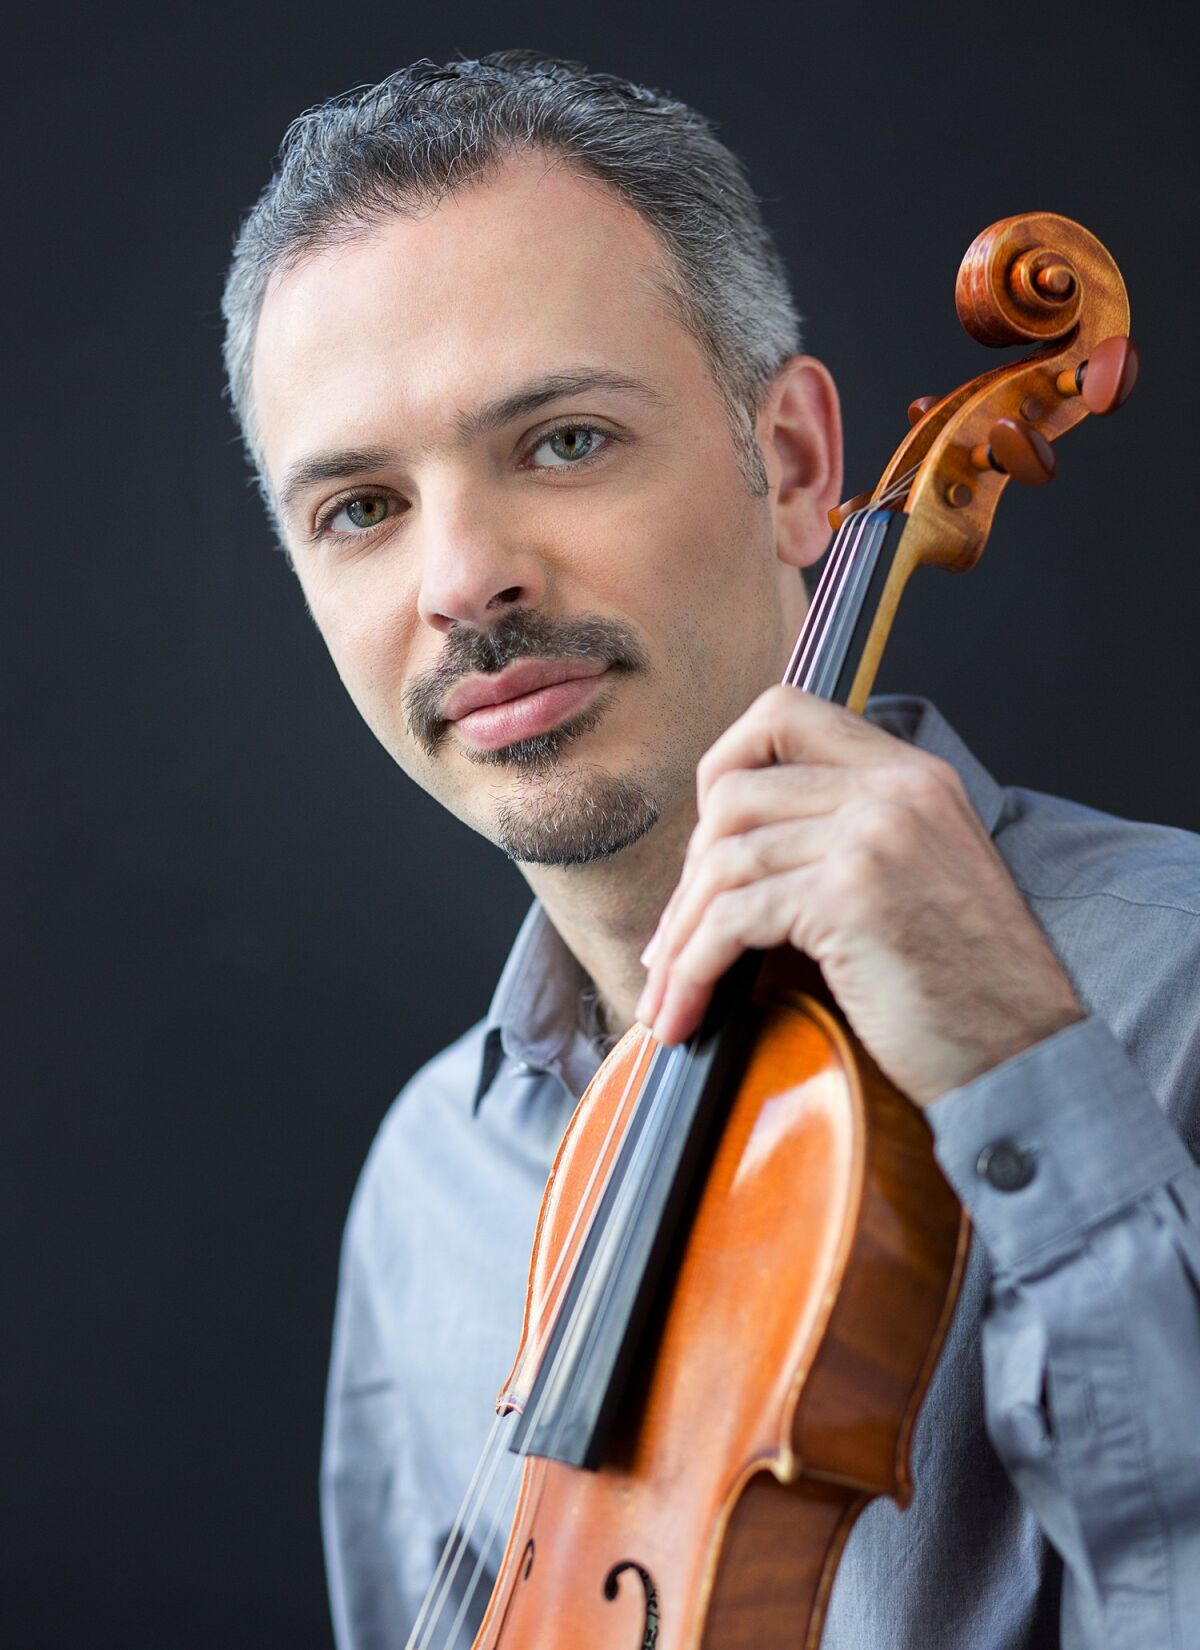 Violinist Colin Jacobsen with his violin